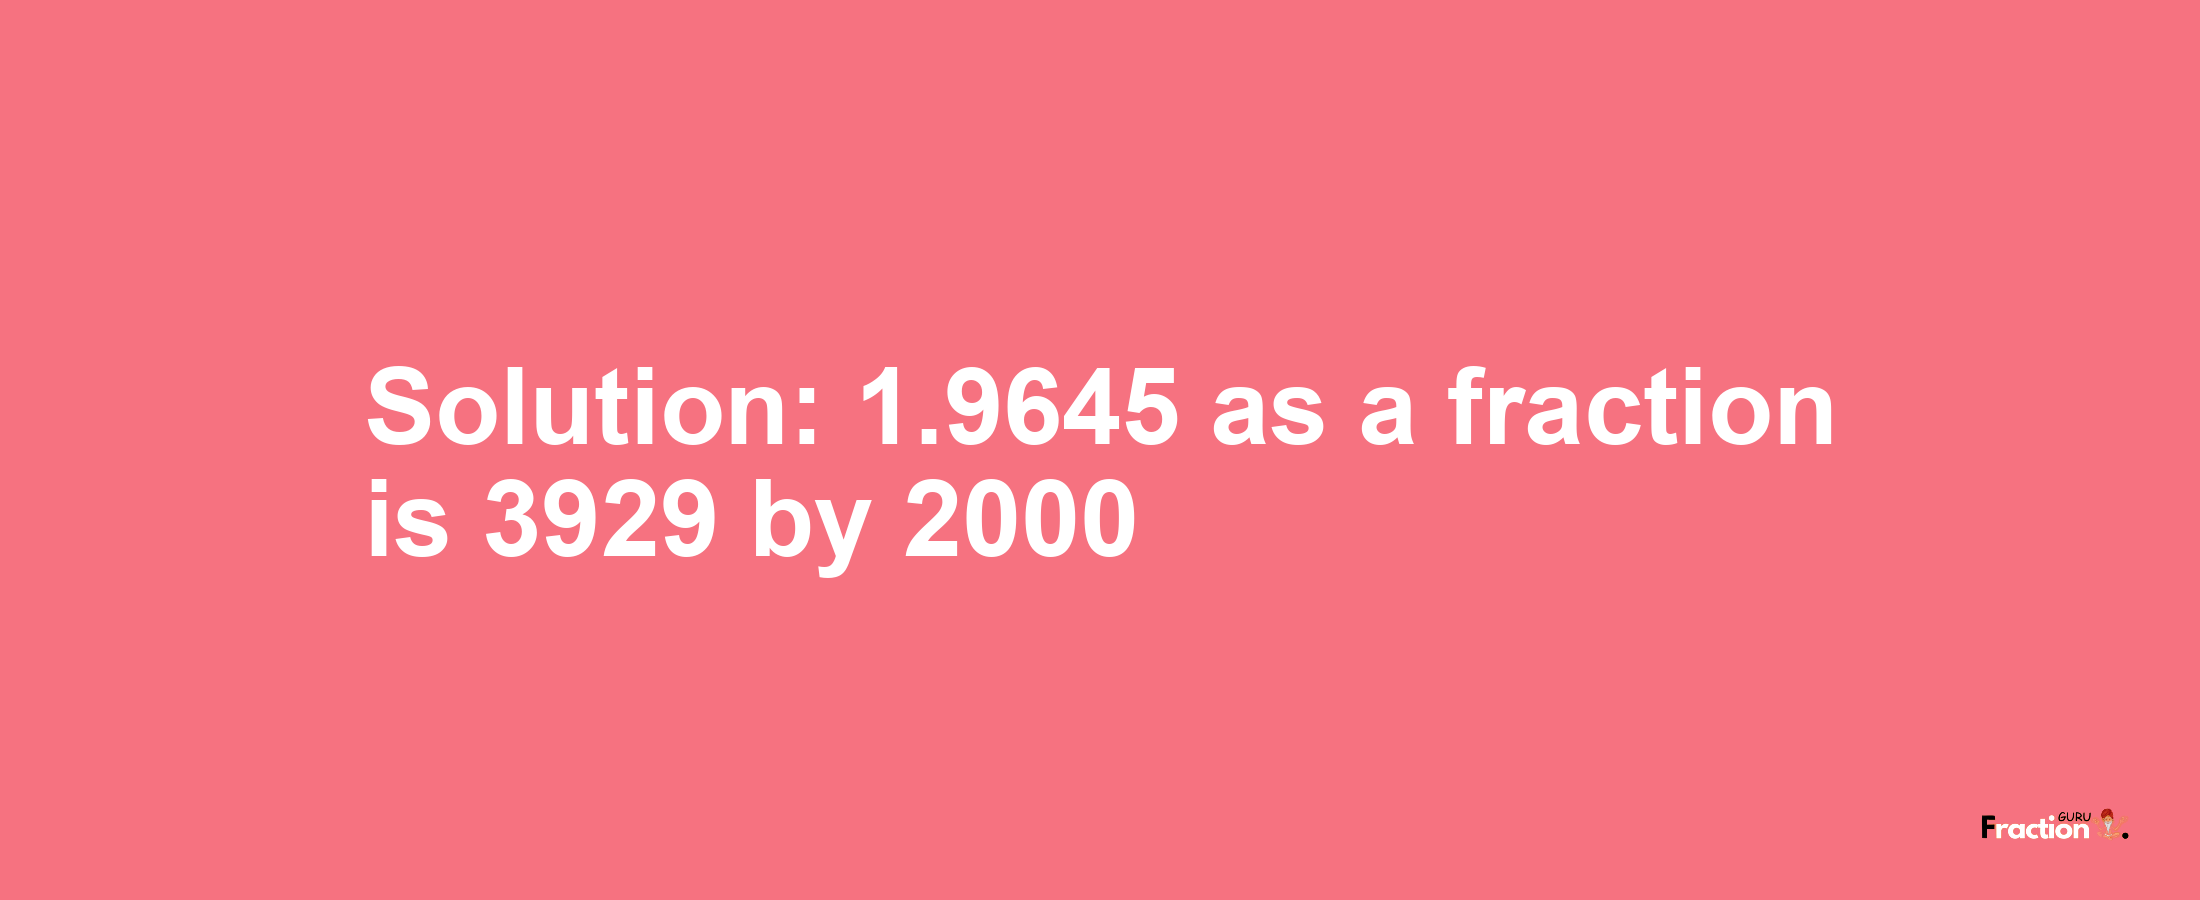 Solution:1.9645 as a fraction is 3929/2000